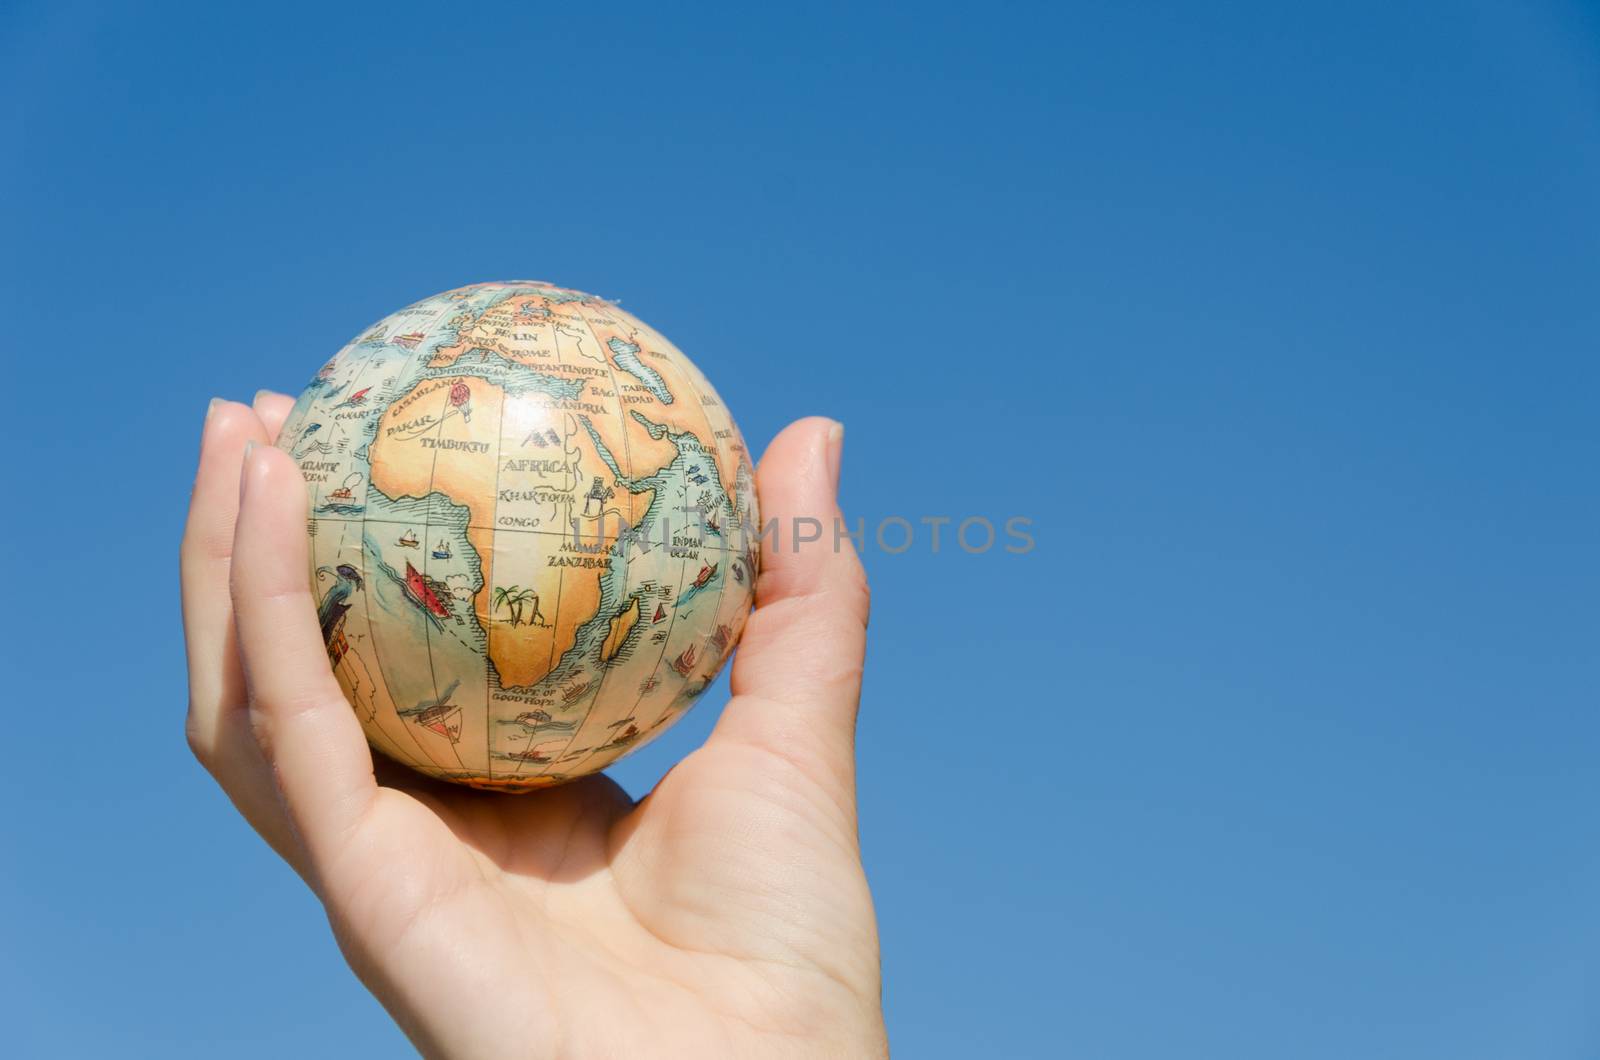 earth globe miniature model in female palm on blue sky background, Africa, symbolizing environmental care.